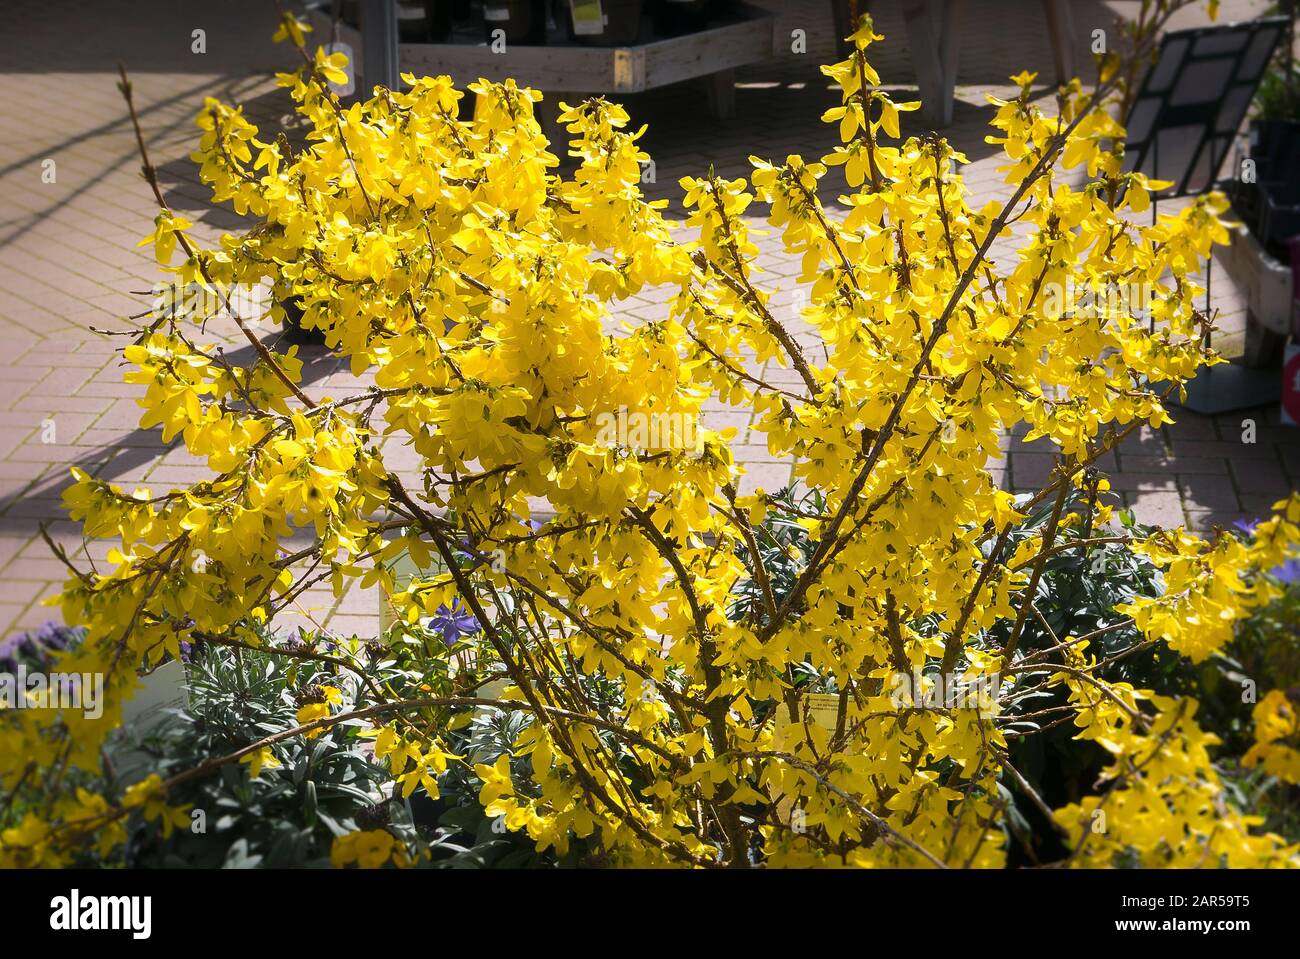 Forsythia Weekend in a pot for sale at an English garden centre in March showing characteristic yellow flowers Stock Photo